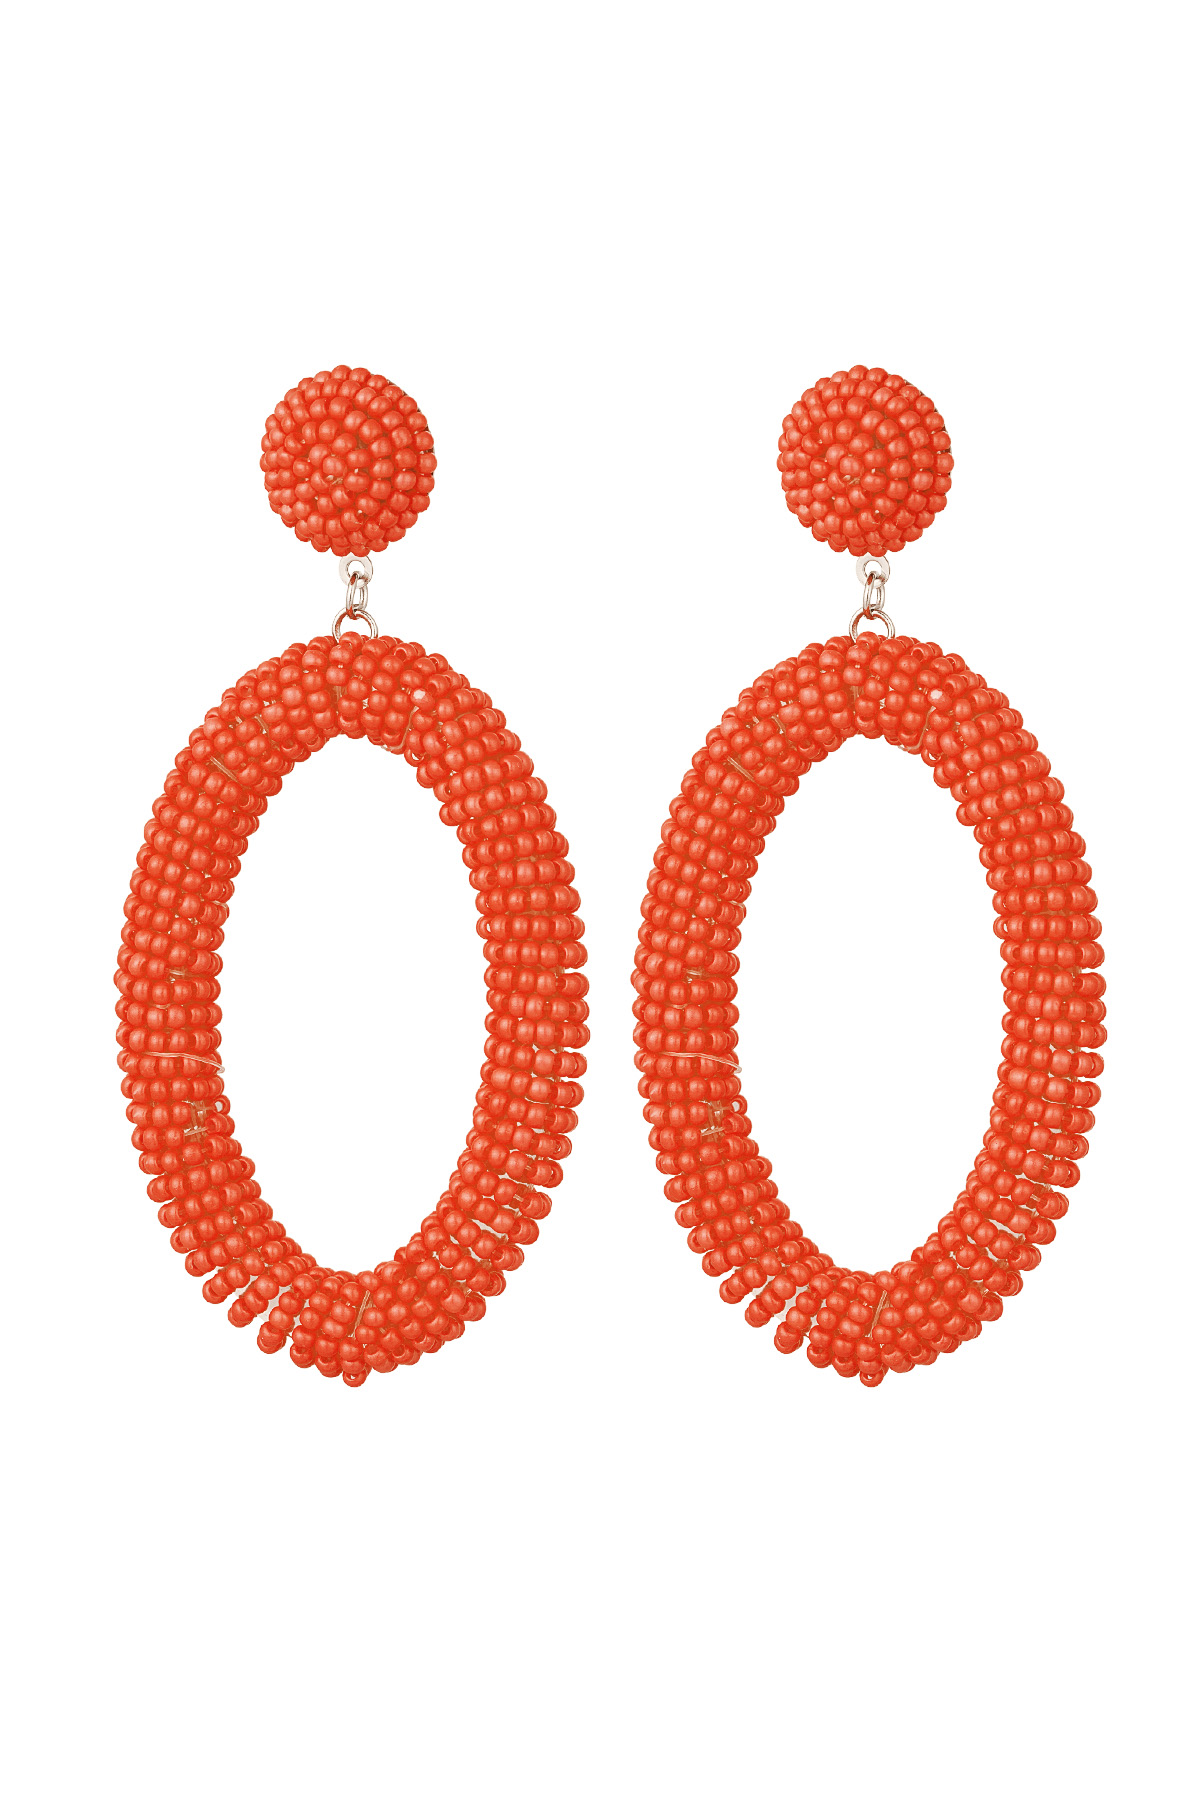 Earrings beads candy elongated - orange Stainless Steel